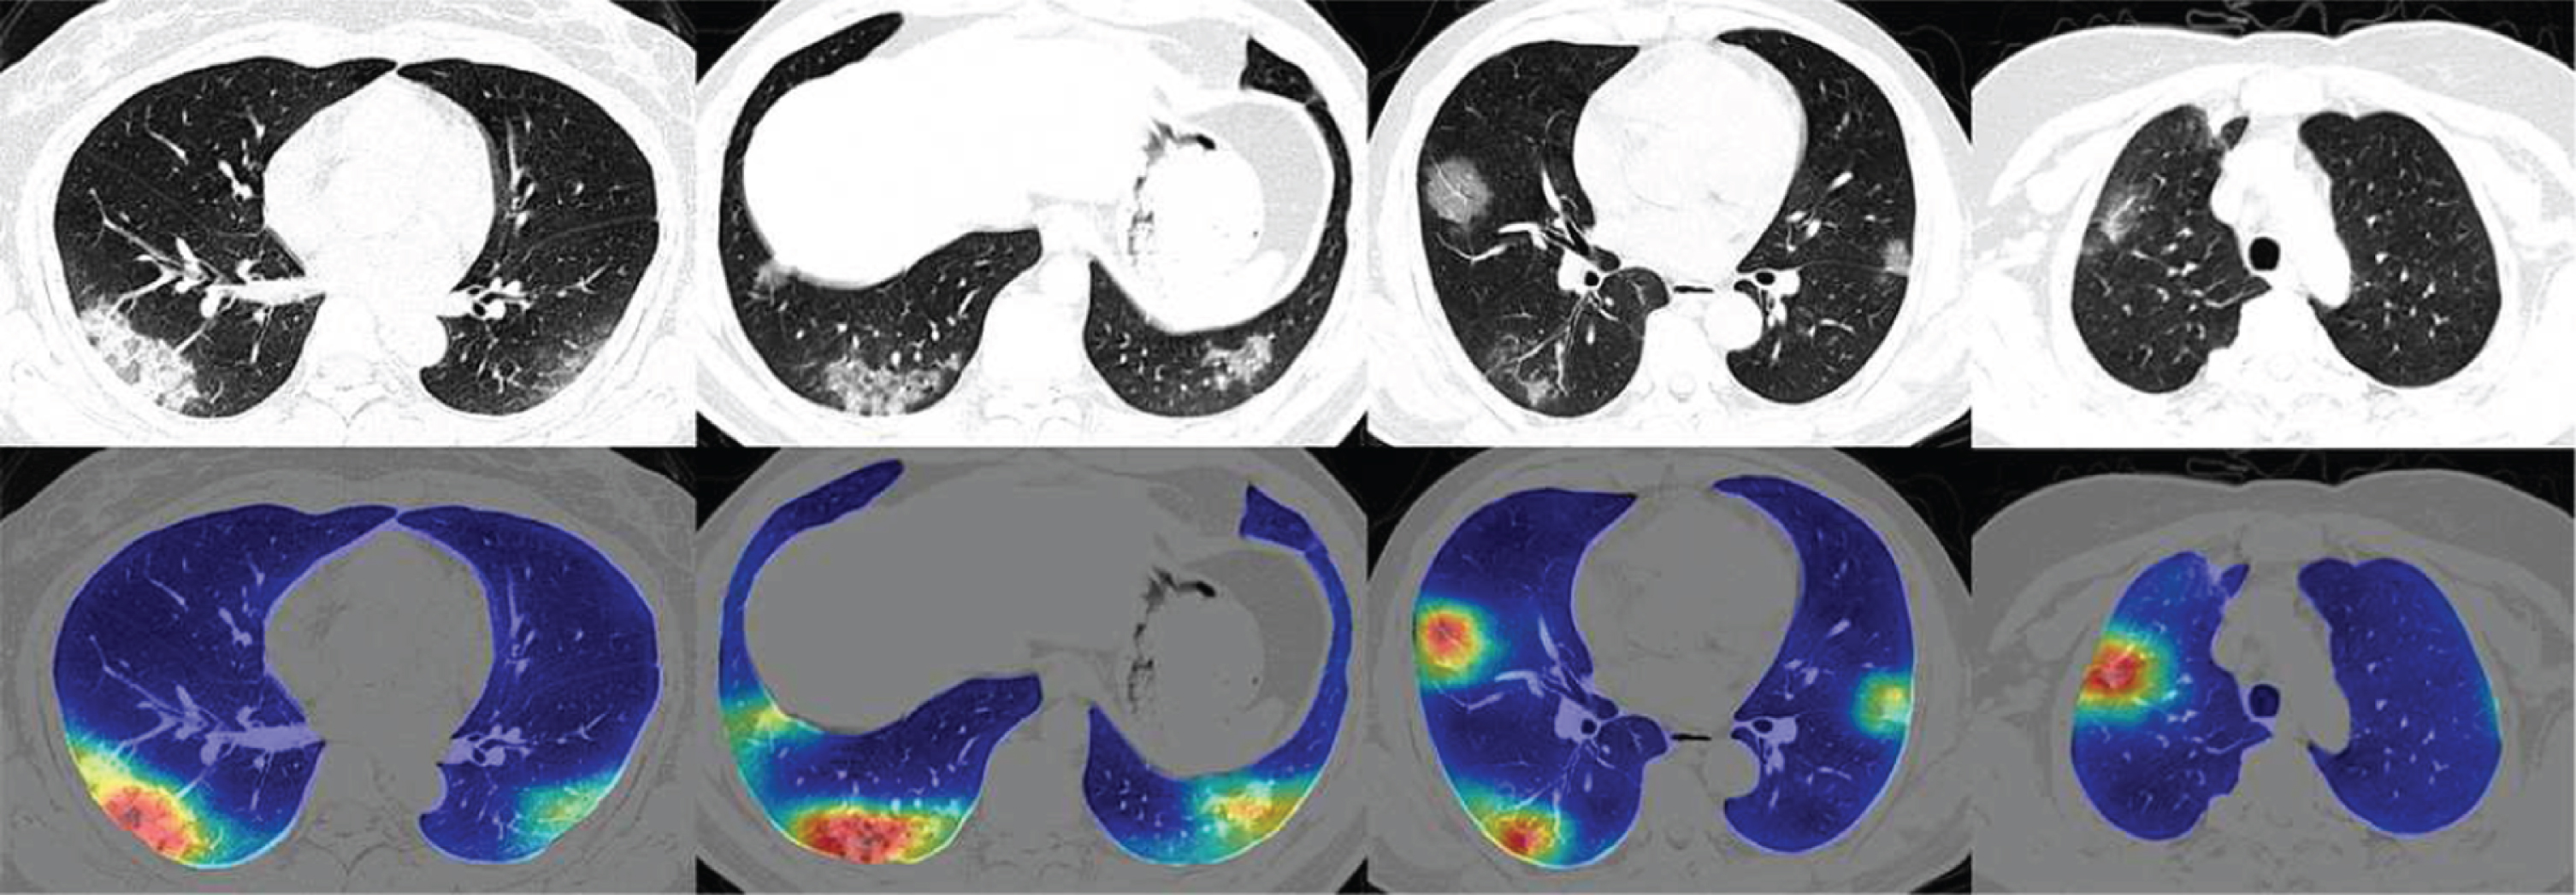 Four COVID-19 lung CT scans (top) with corresponding colored maps showing coronavirus abnormalities (bottom). Source:hospitals-deploy-ai-tools-detect-covid19-chest-scans.